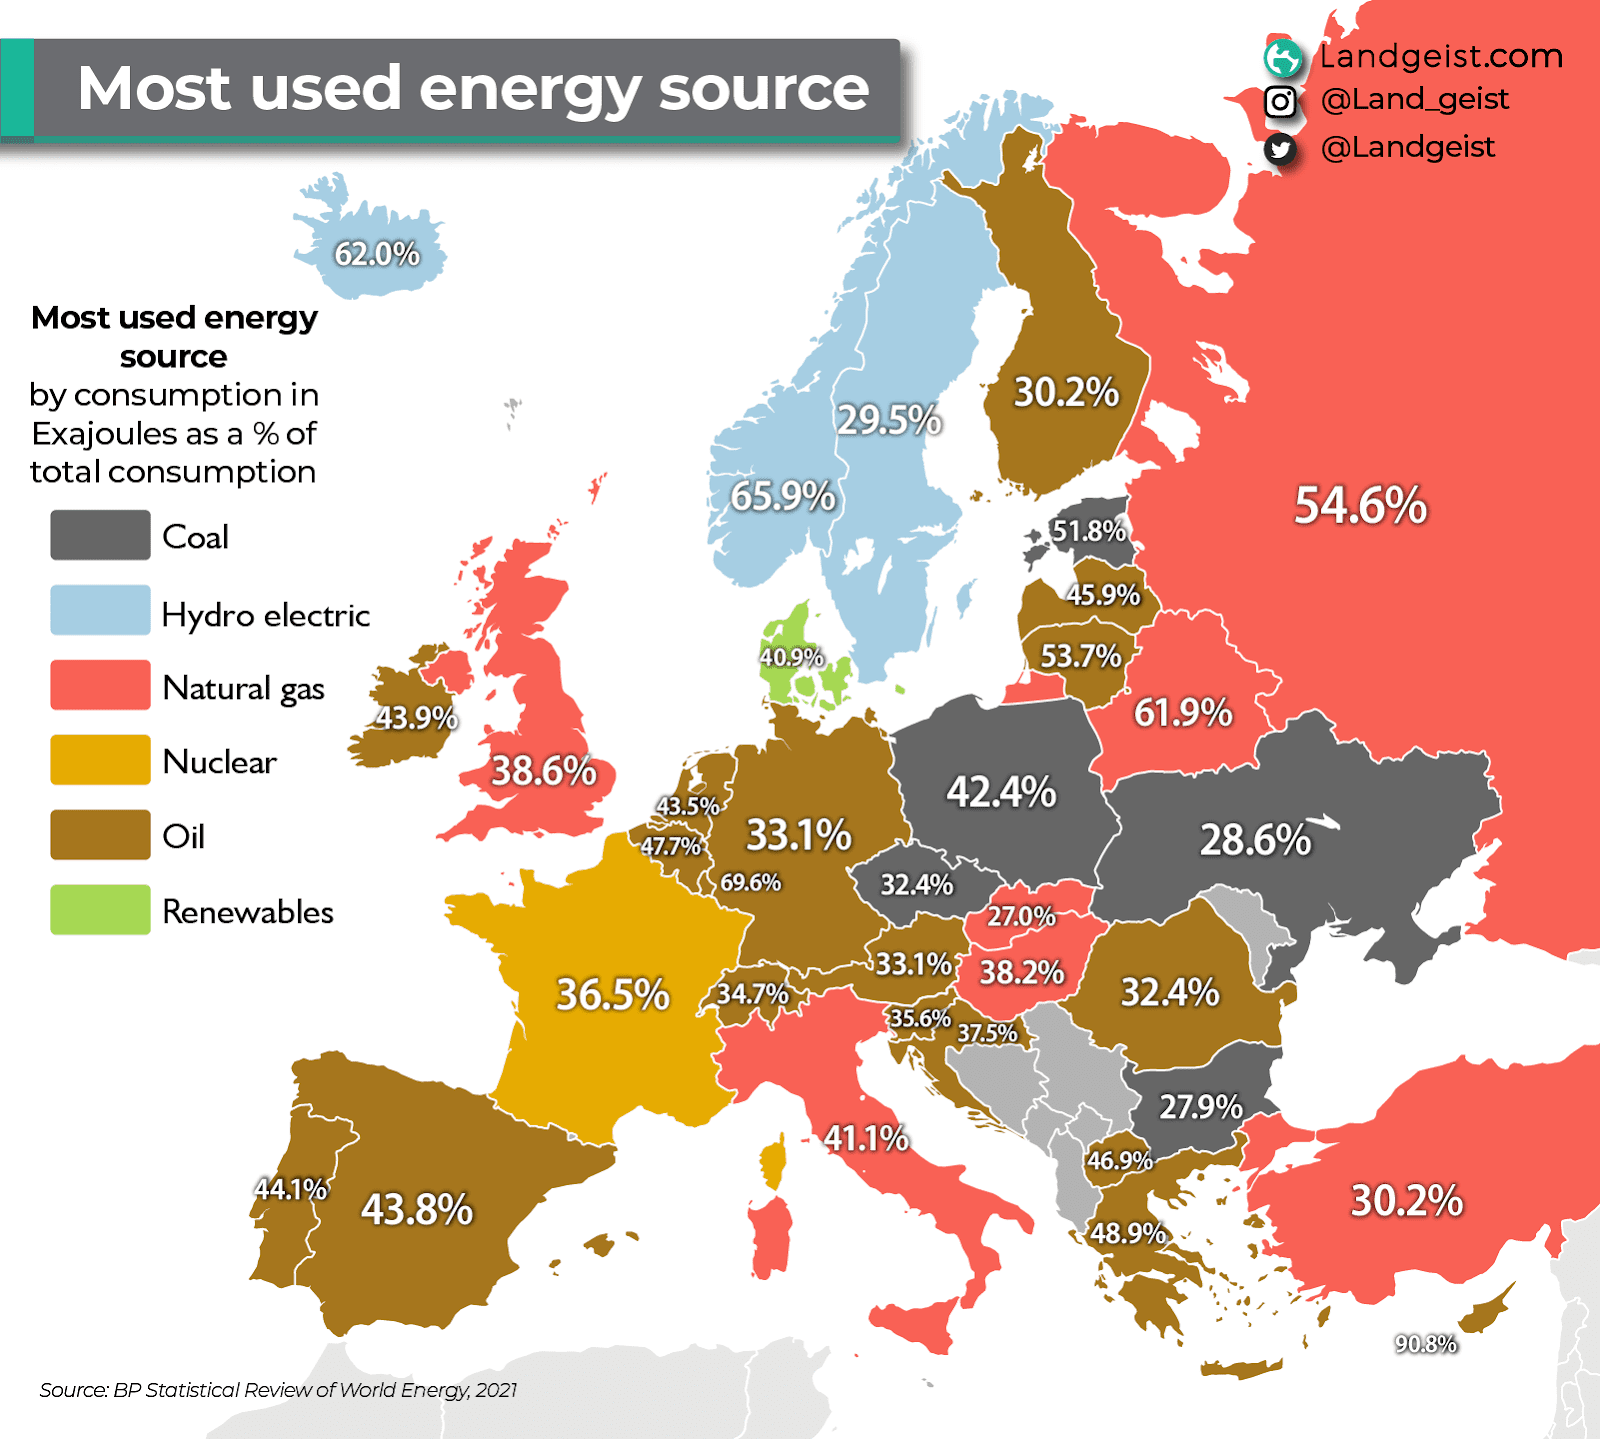 Most used energy source